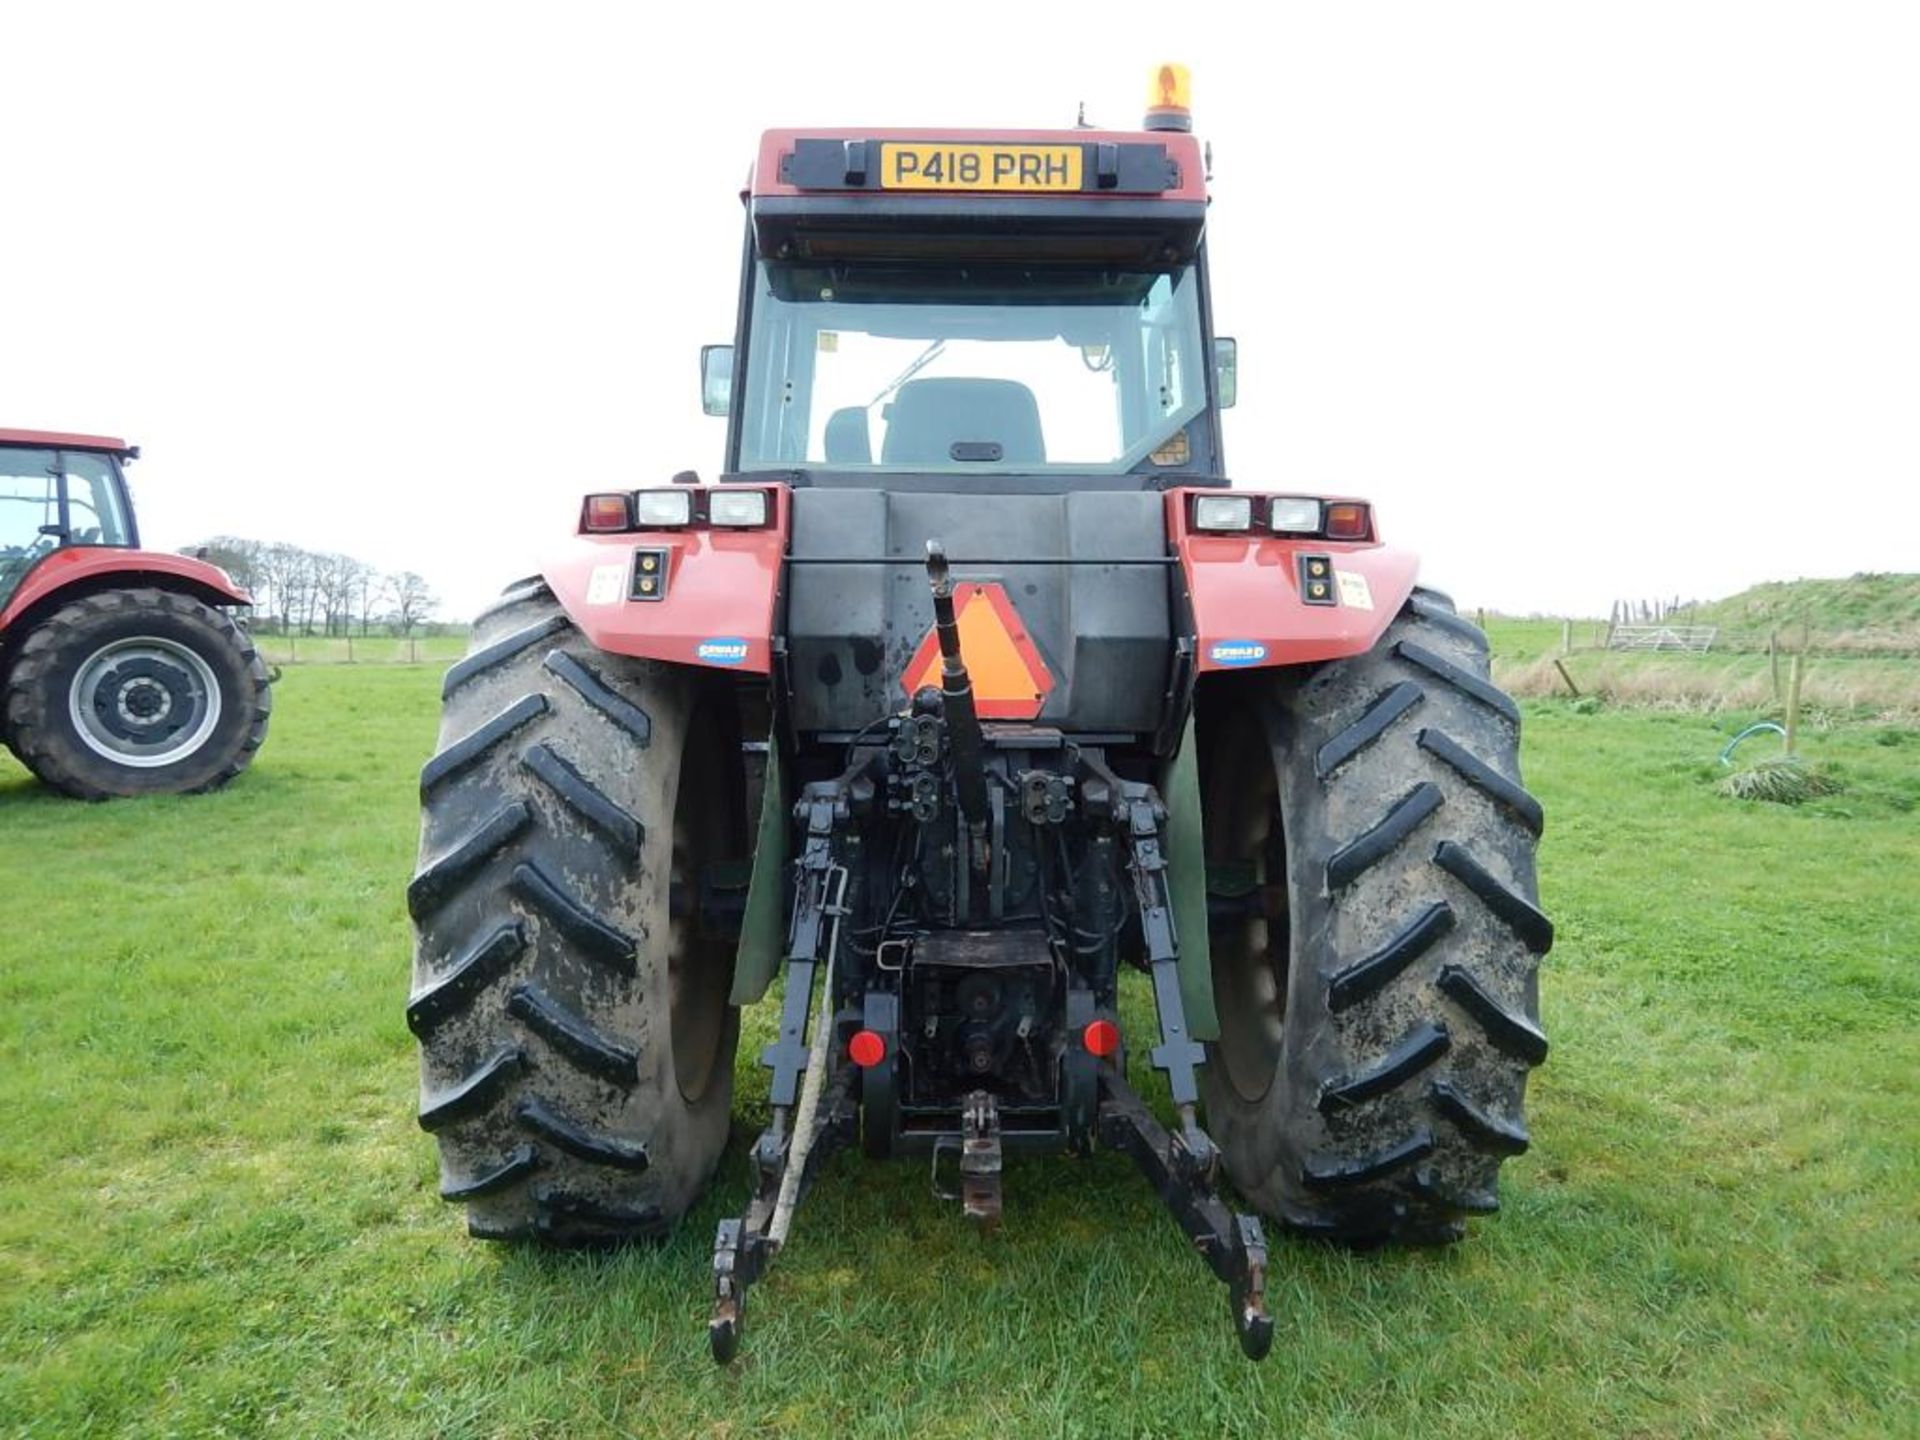 1997 CASE IH 7220 Magnum 4wd TRACTOR Fitted with front weights on 20.8R42 rear and 16.9R30 Goodyears - Image 3 of 6